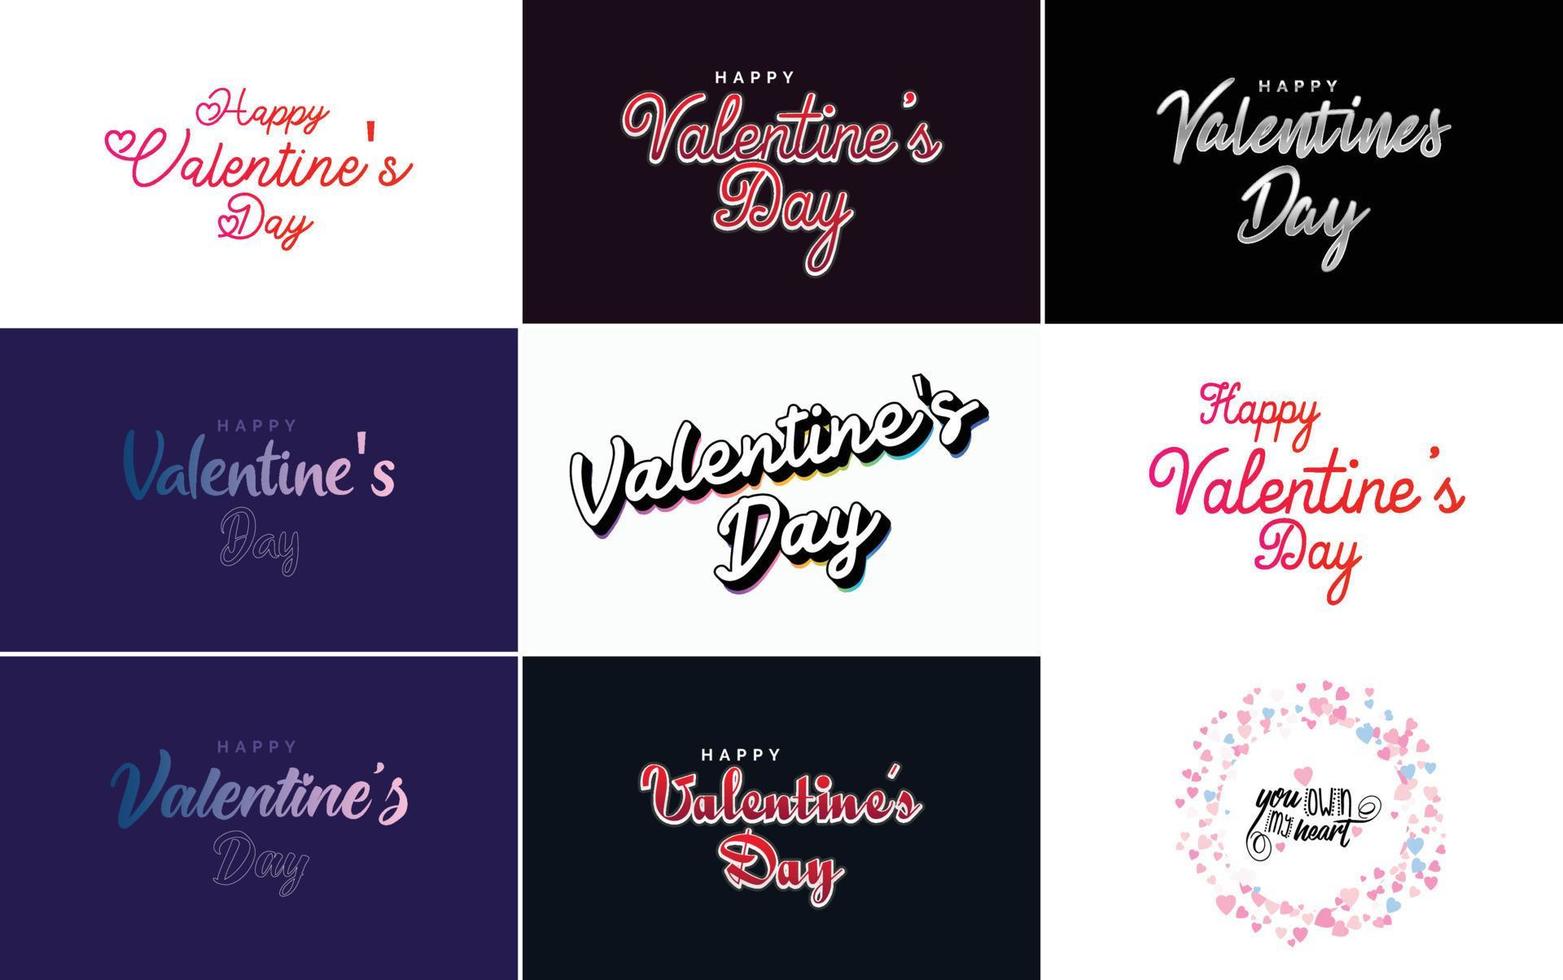 Happy Valentine's Day typography design with a heart-shaped balloon and a gradient color scheme vector